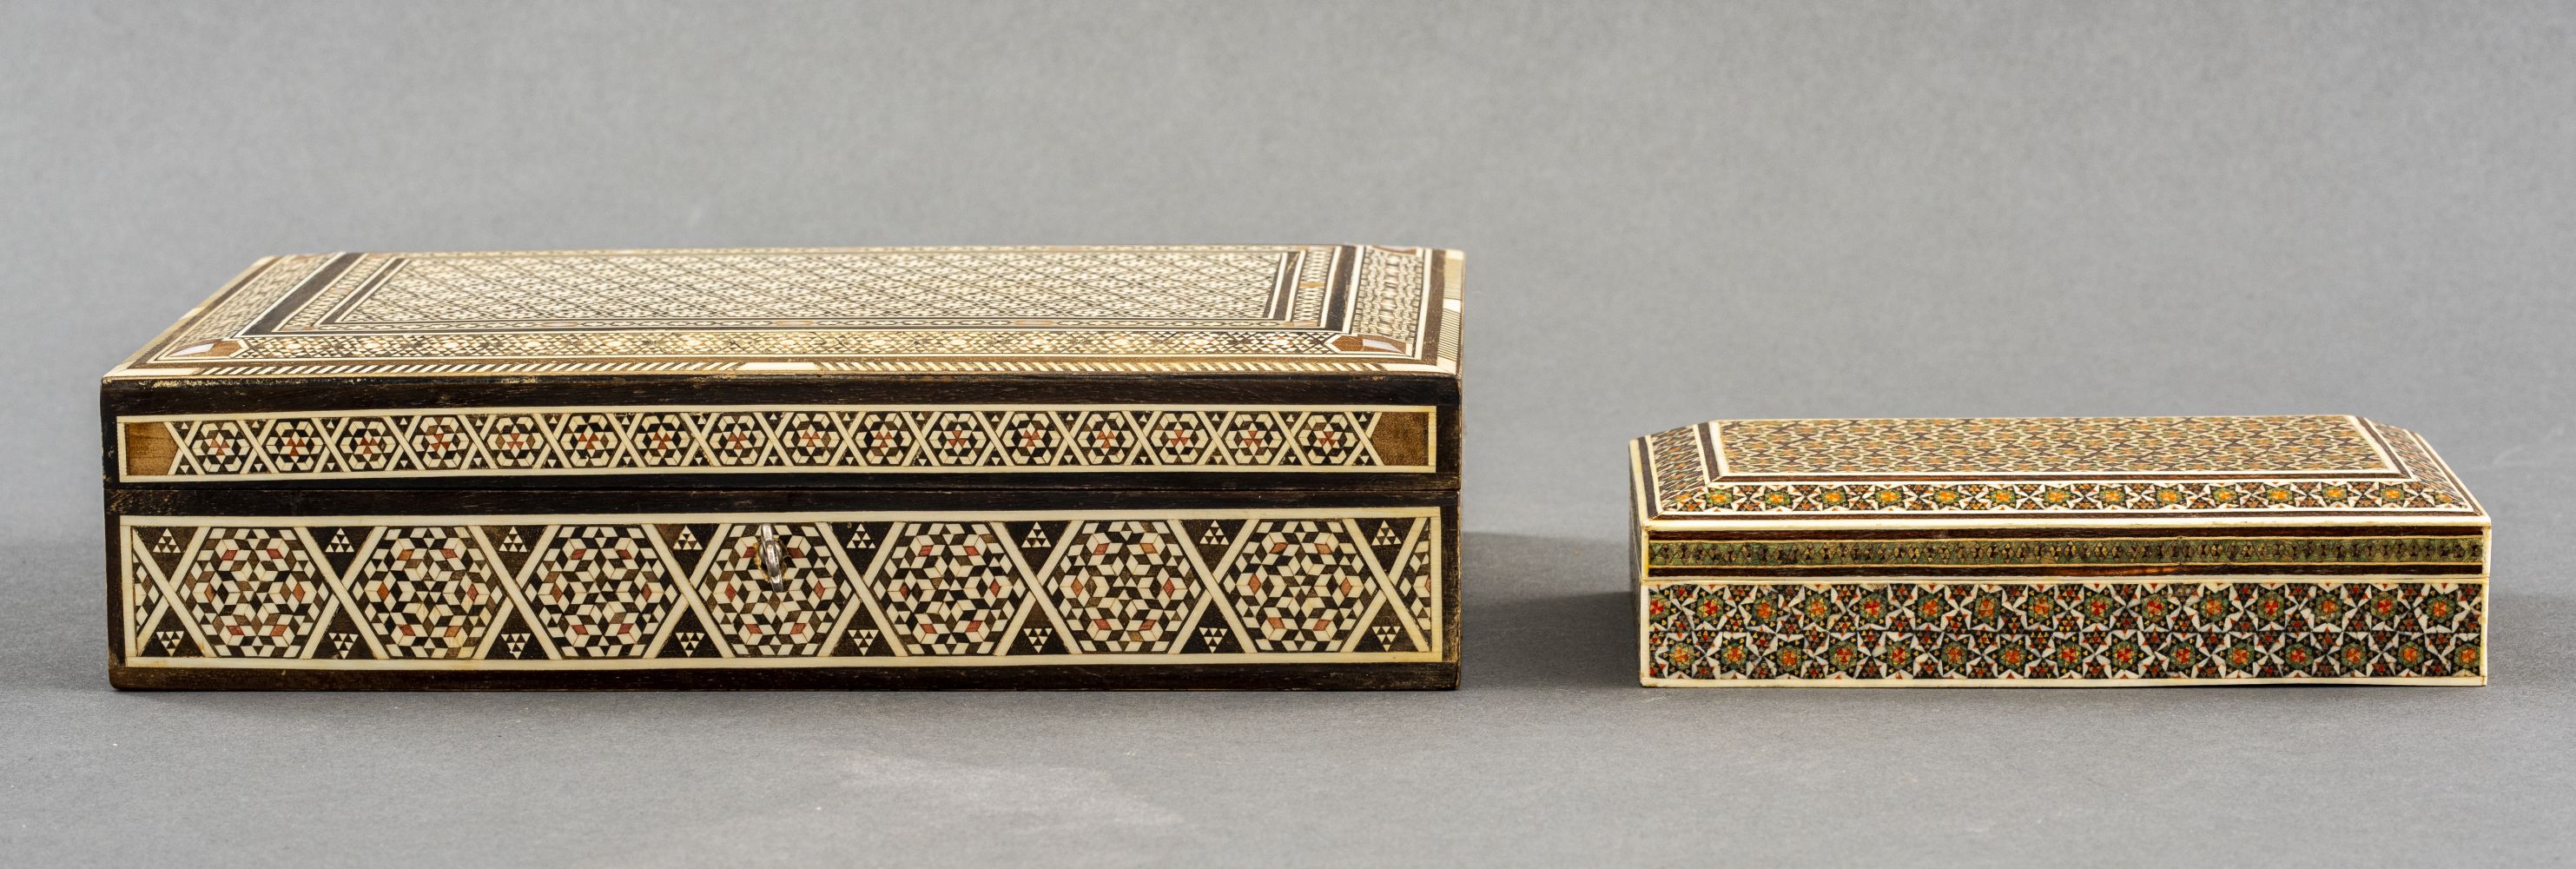 SYRIAN INLAID WOOD BOXES, 2 Two